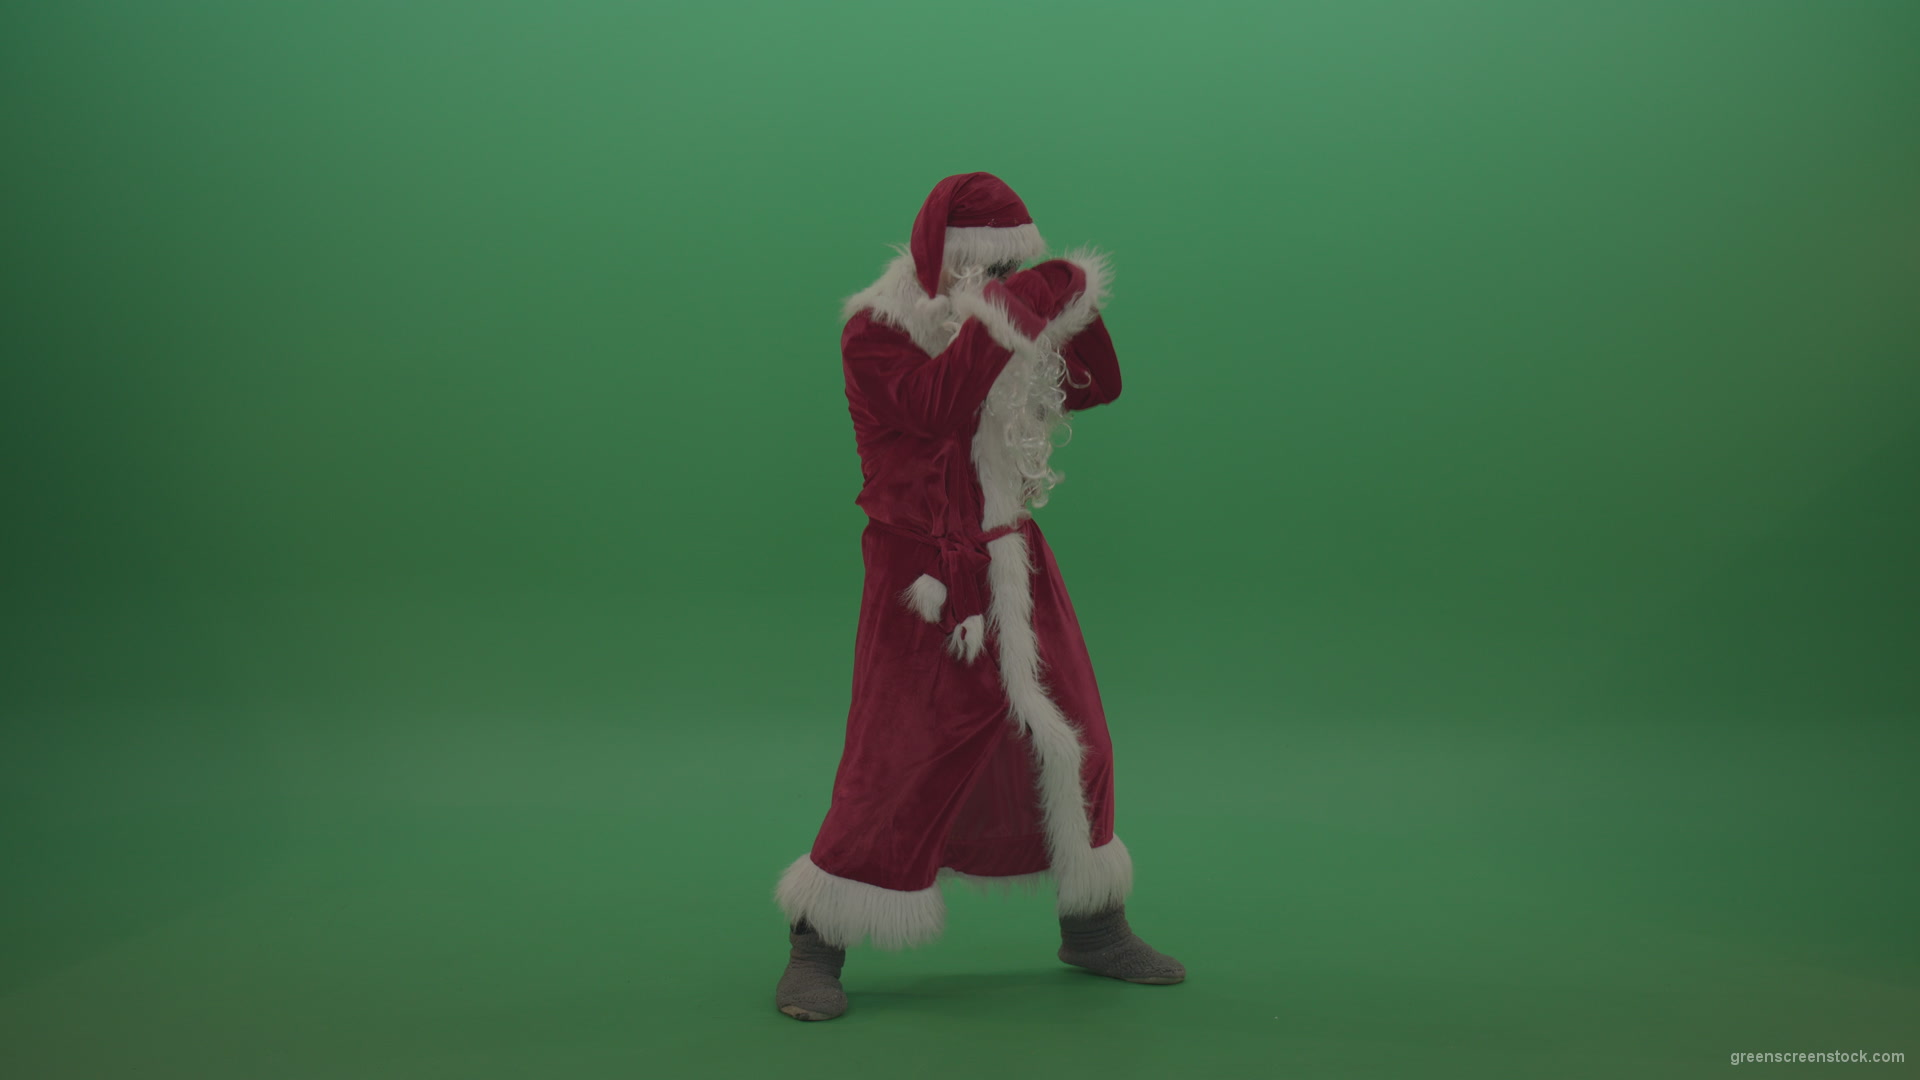 Santa-in-black-glasses-show-cases-his-boxing-skills-over-chromakey-background_009 Green Screen Stock